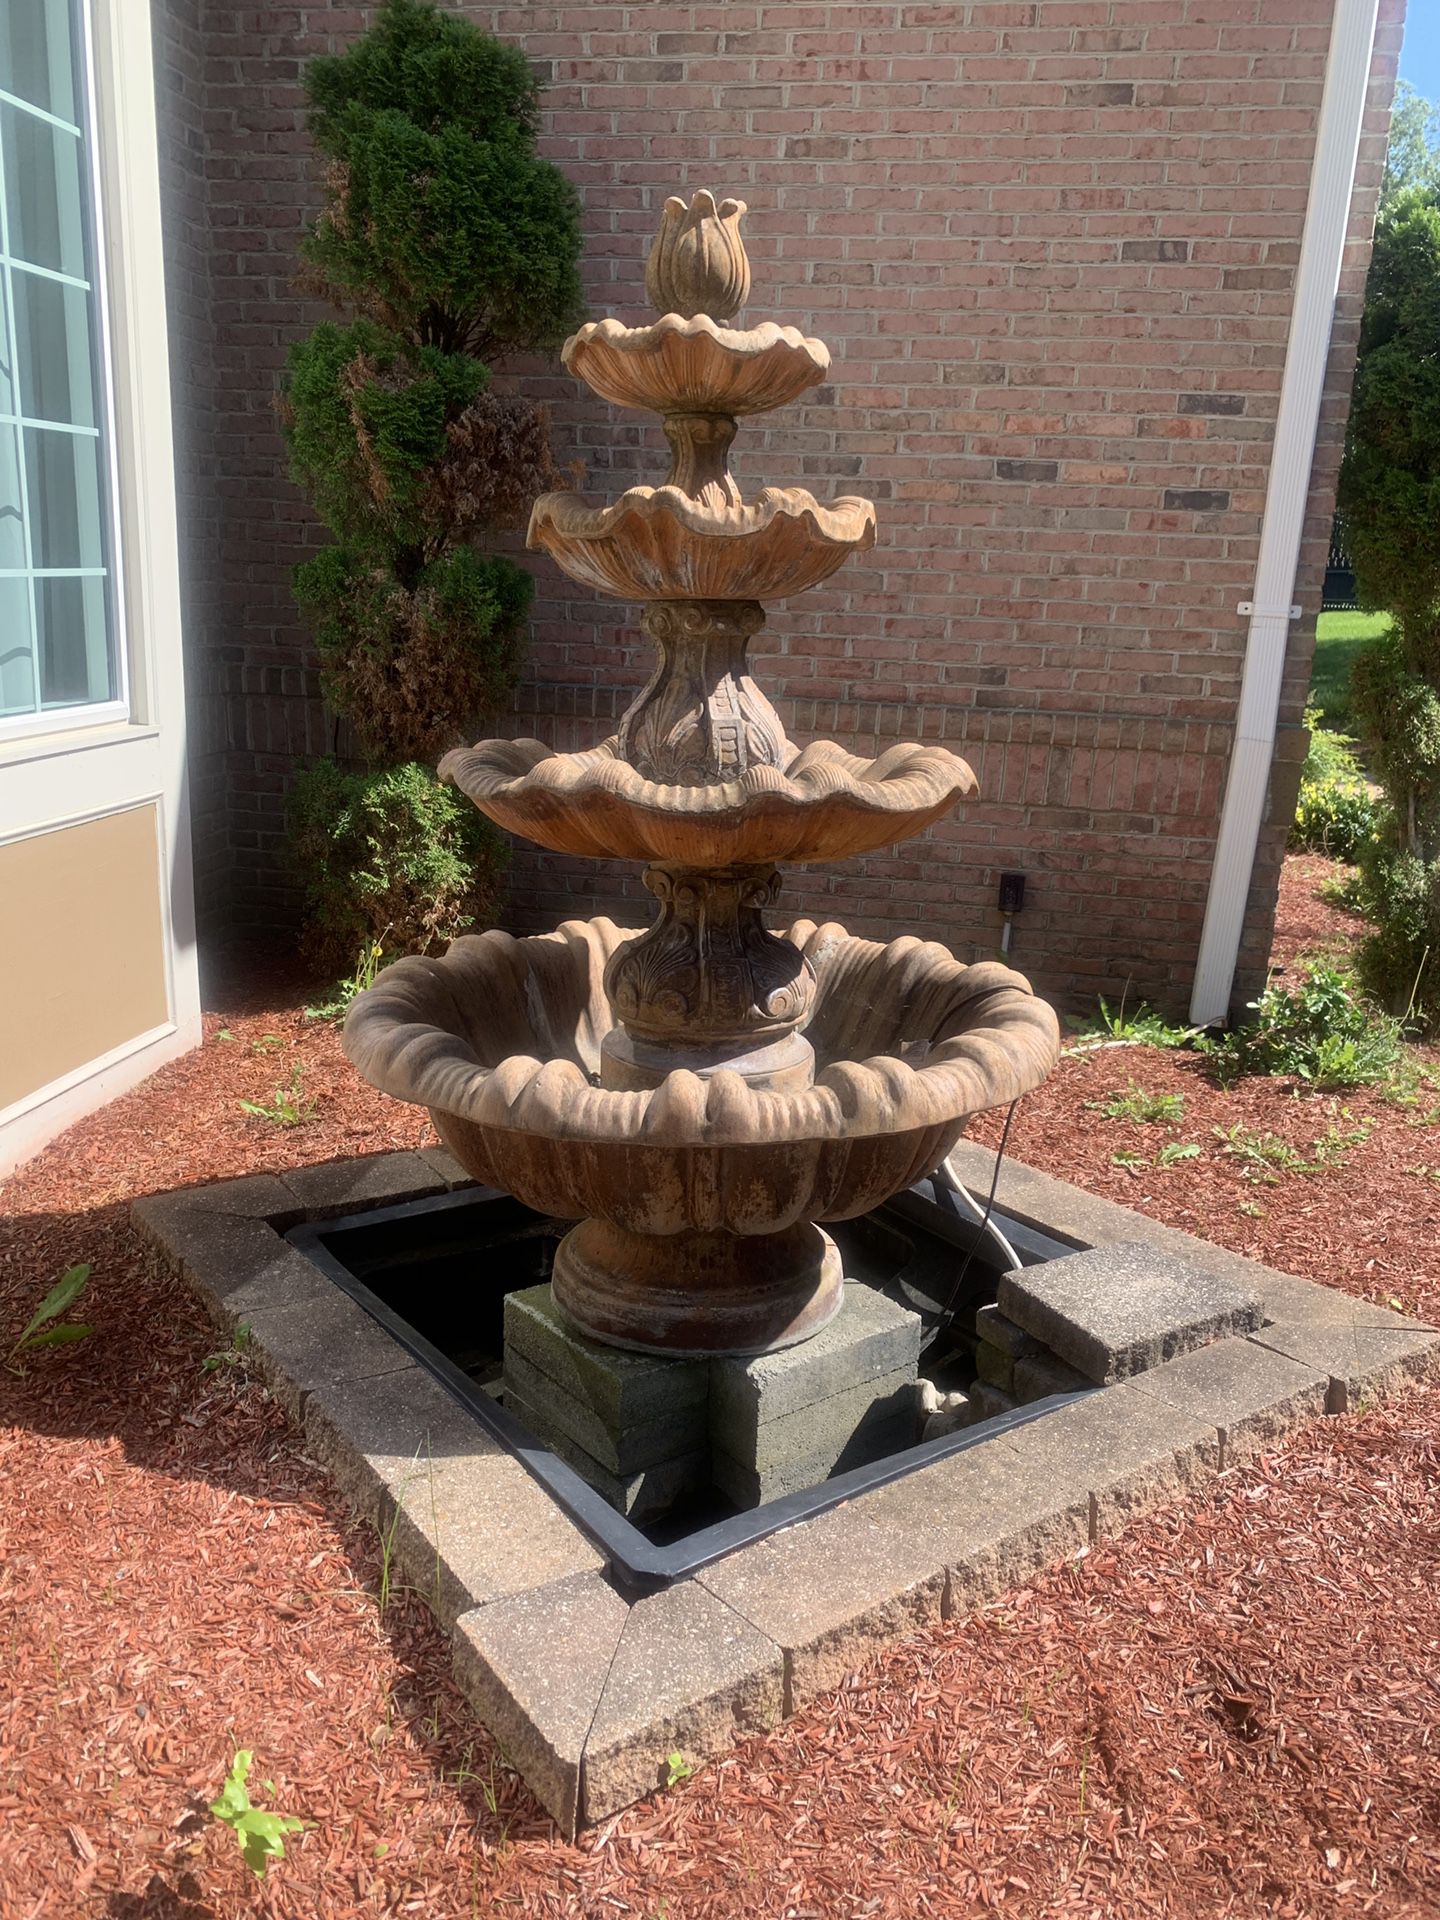 Water fountain beautiful bought it 1500 selling for 500